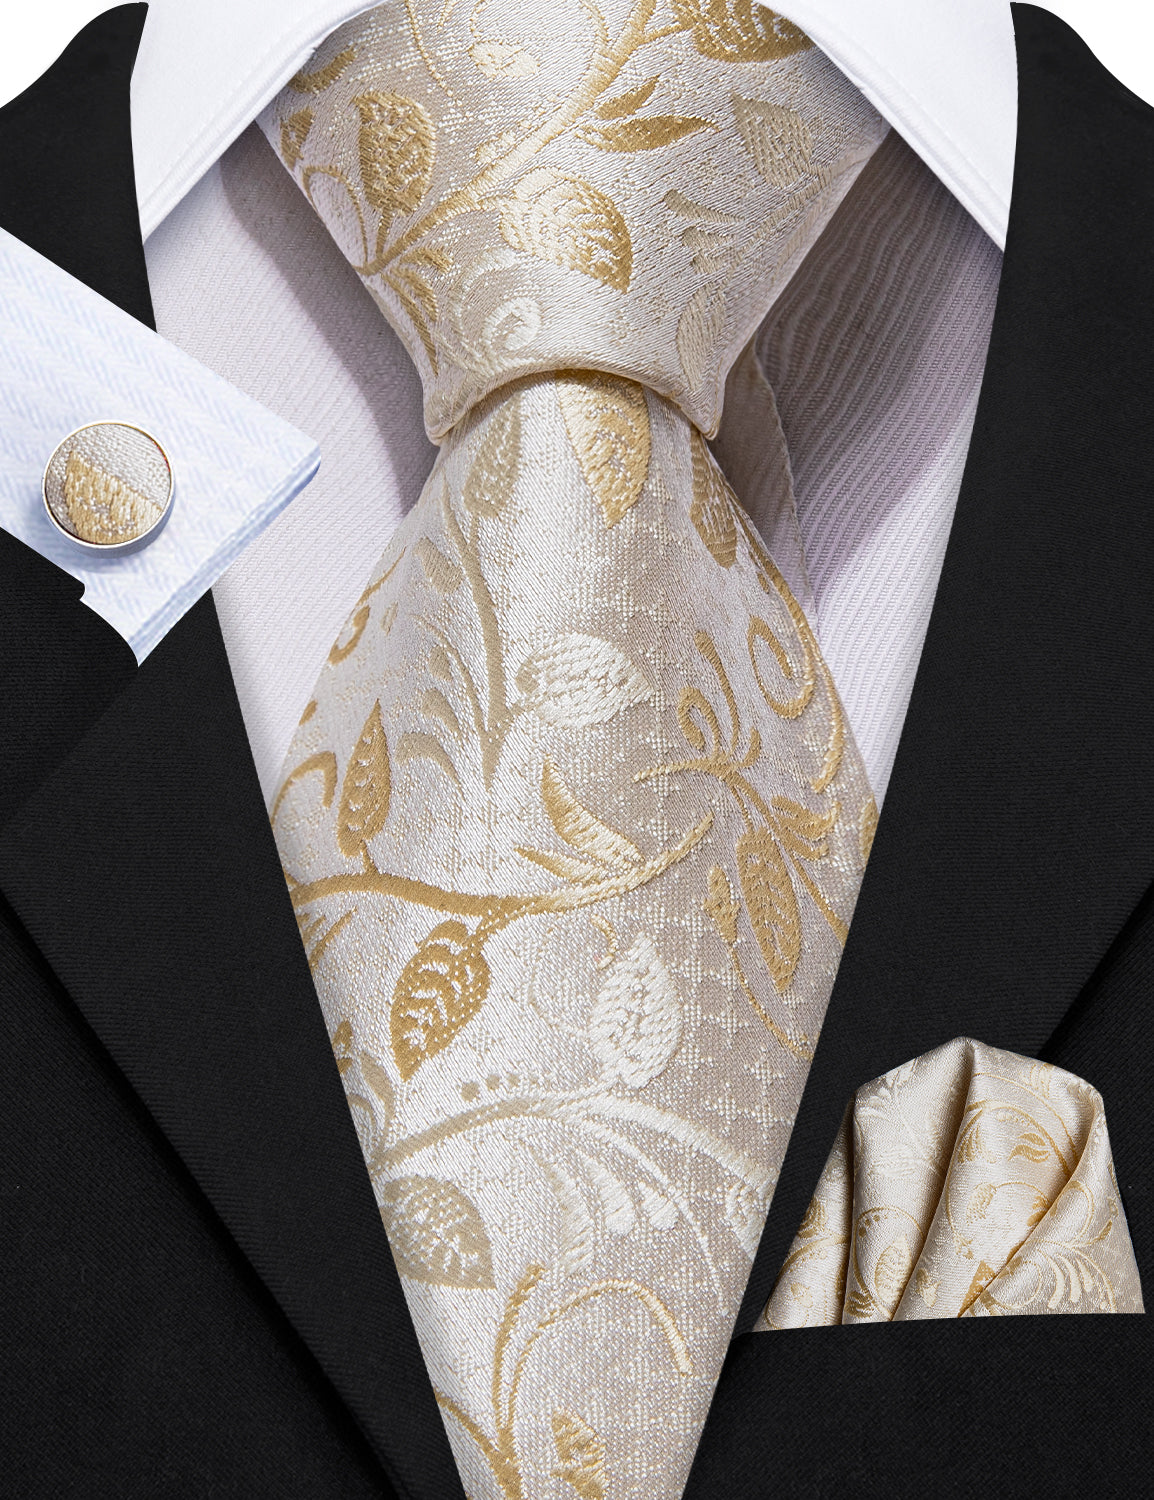 Barry.wang Champagne Tie Golden Floral Tie Pocket Square Cufflinks Set